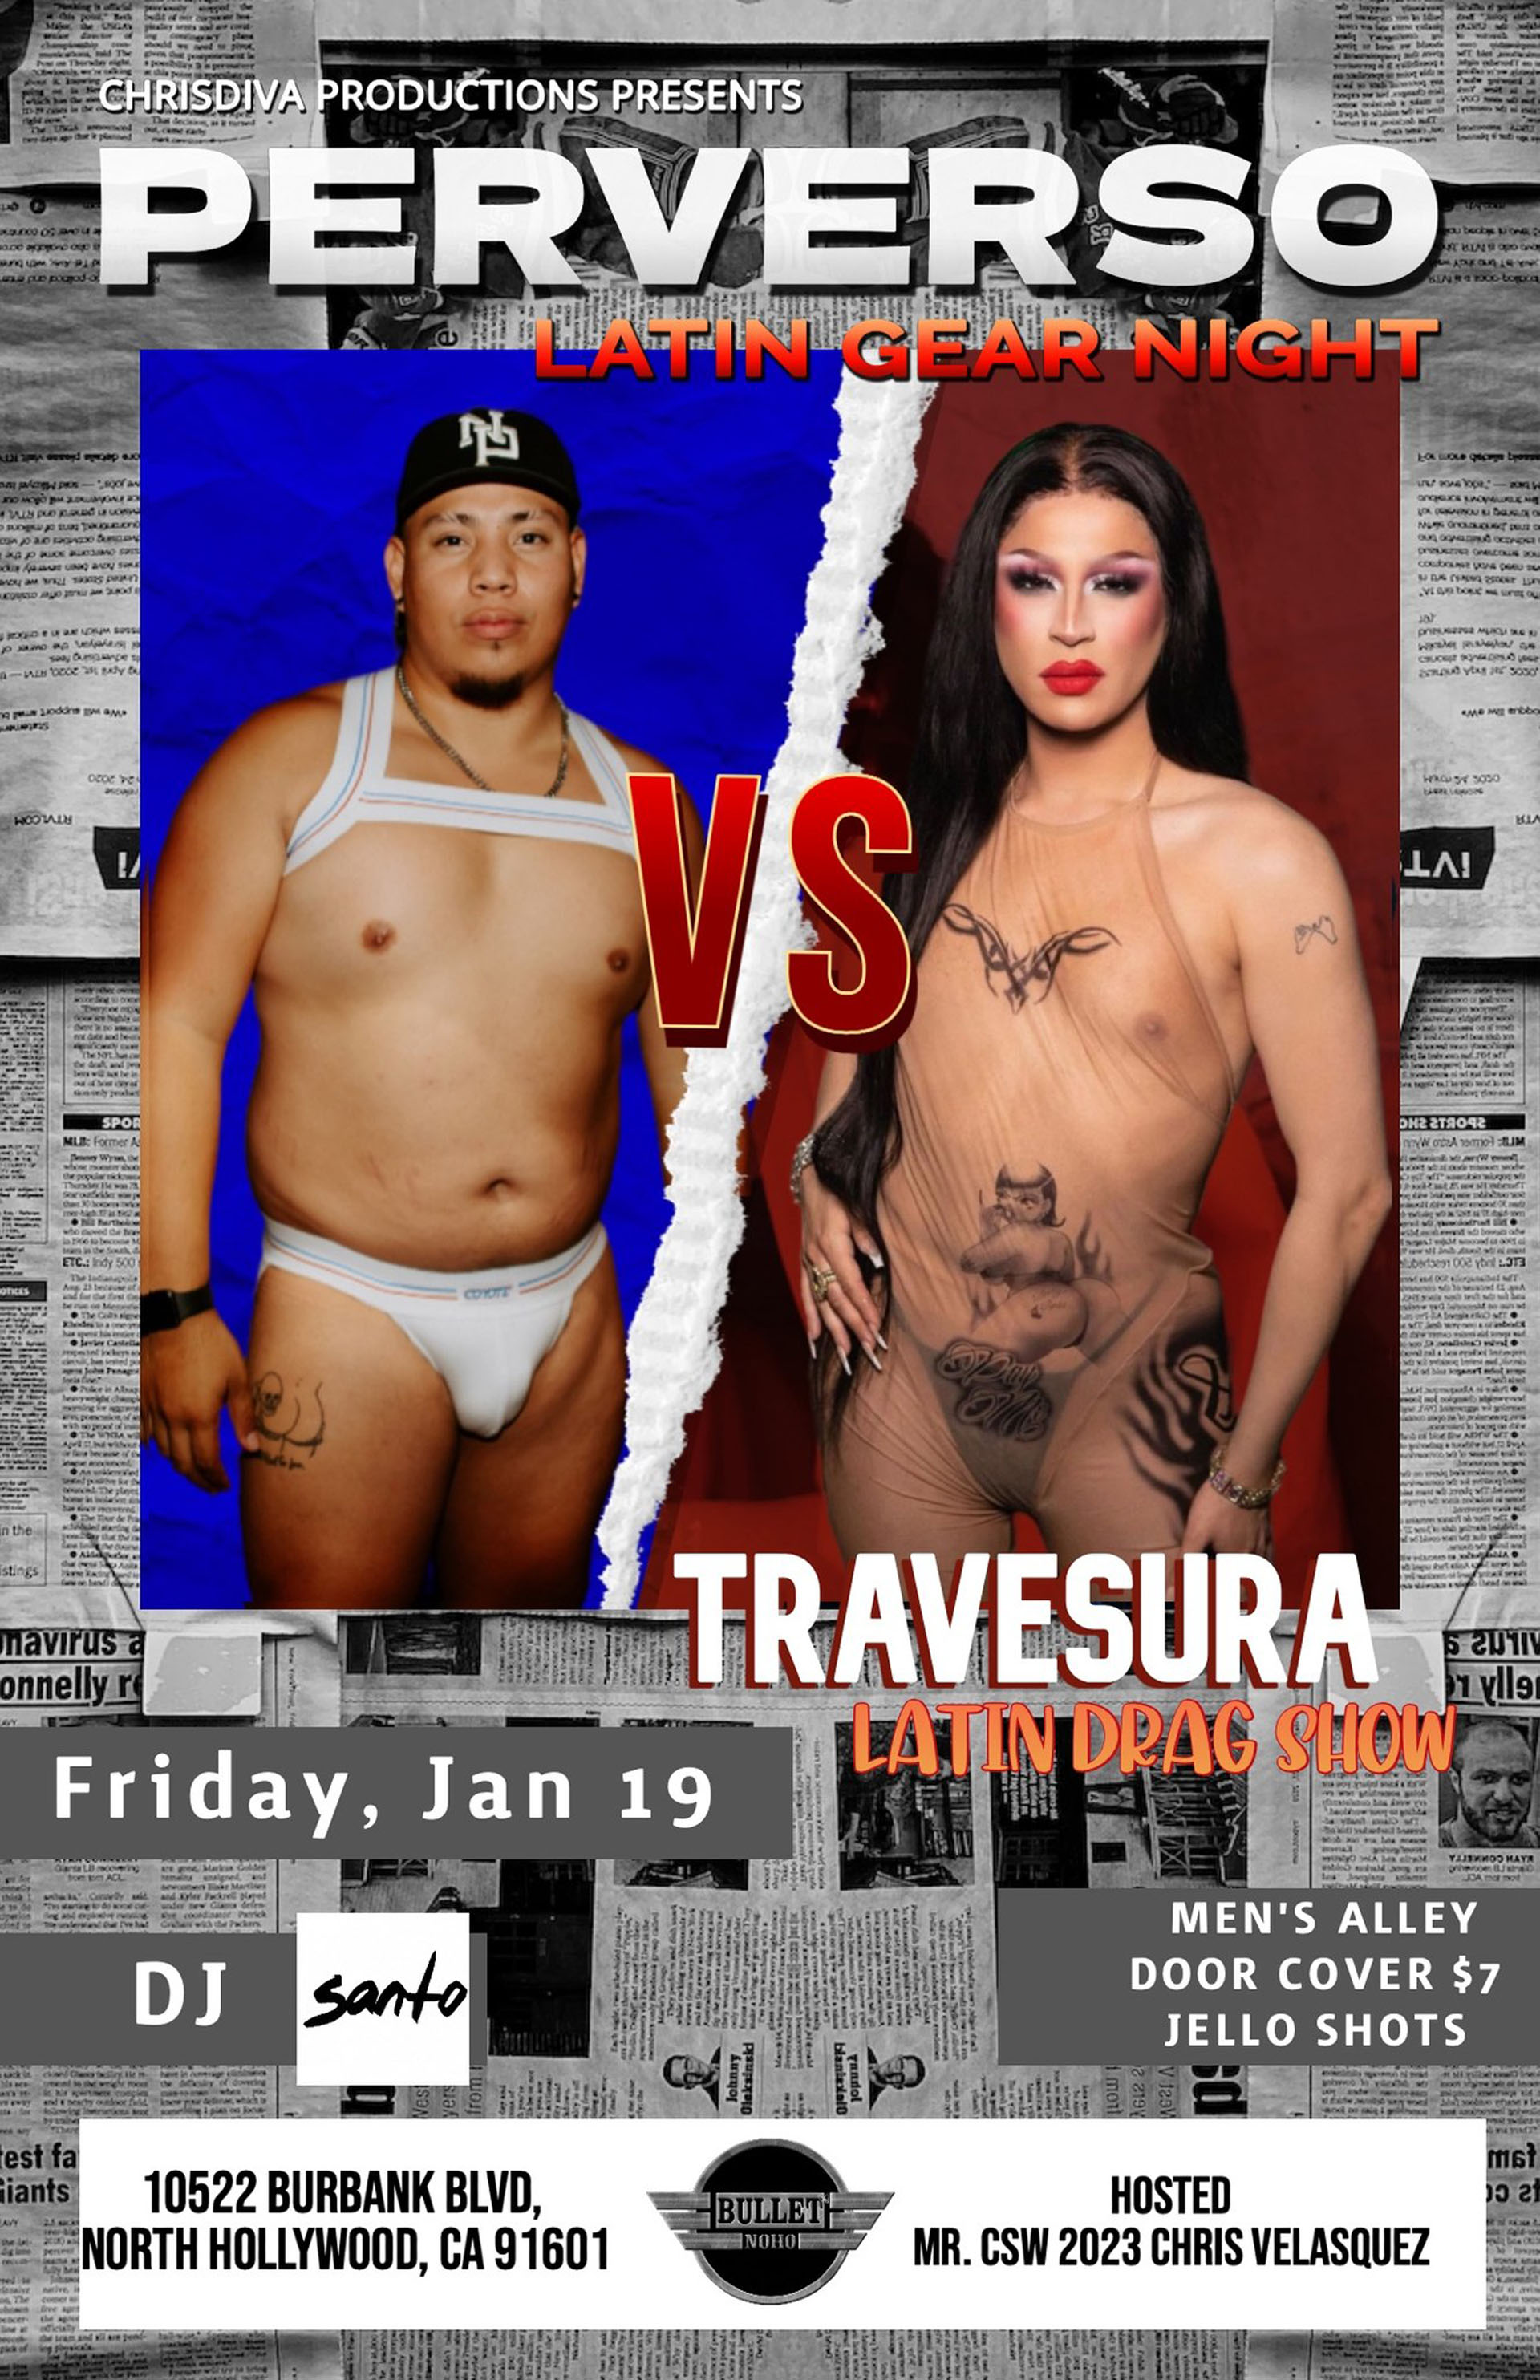 The Bullet Bar and ChrisDiva Productions Present: PERVERSO--LATIN GEAR NIGHT TRAVESURA LATIN DRAG SHOW Hosted by Mr. CSW Leather CSW Chris Velasquez! Friday, 01/19/24 at 9PM. With DJ SANTO! Men's Alley! JELL-O SHOTS! $7 Cover.